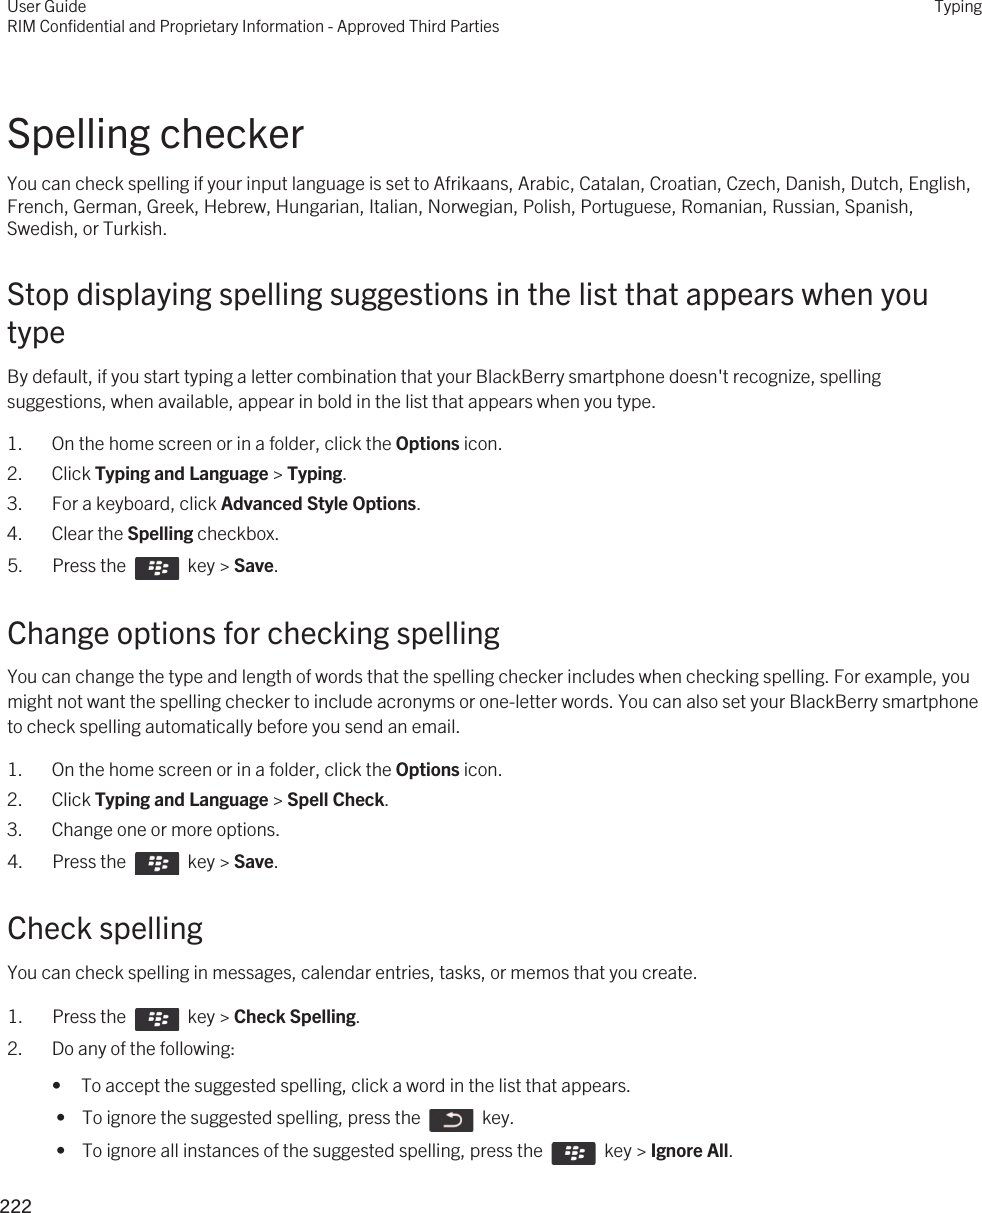 Spelling checkerYou can check spelling if your input language is set to Afrikaans, Arabic, Catalan, Croatian, Czech, Danish, Dutch, English, French, German, Greek, Hebrew, Hungarian, Italian, Norwegian, Polish, Portuguese, Romanian, Russian, Spanish, Swedish, or Turkish.Stop displaying spelling suggestions in the list that appears when you typeBy default, if you start typing a letter combination that your BlackBerry smartphone doesn&apos;t recognize, spelling suggestions, when available, appear in bold in the list that appears when you type.1. On the home screen or in a folder, click the Options icon.2. Click Typing and Language &gt; Typing.3. For a keyboard, click Advanced Style Options.4. Clear the Spelling checkbox.5.  Press the    key &gt; Save. Change options for checking spellingYou can change the type and length of words that the spelling checker includes when checking spelling. For example, you might not want the spelling checker to include acronyms or one-letter words. You can also set your BlackBerry smartphone to check spelling automatically before you send an email.1. On the home screen or in a folder, click the Options icon.2. Click Typing and Language &gt; Spell Check.3. Change one or more options.4.  Press the    key &gt; Save. Check spellingYou can check spelling in messages, calendar entries, tasks, or memos that you create.1.  Press the    key &gt; Check Spelling. 2. Do any of the following:• To accept the suggested spelling, click a word in the list that appears. •  To ignore the suggested spelling, press the    key. •  To ignore all instances of the suggested spelling, press the    key &gt; Ignore All.User GuideRIM Confidential and Proprietary Information - Approved Third PartiesTyping222 